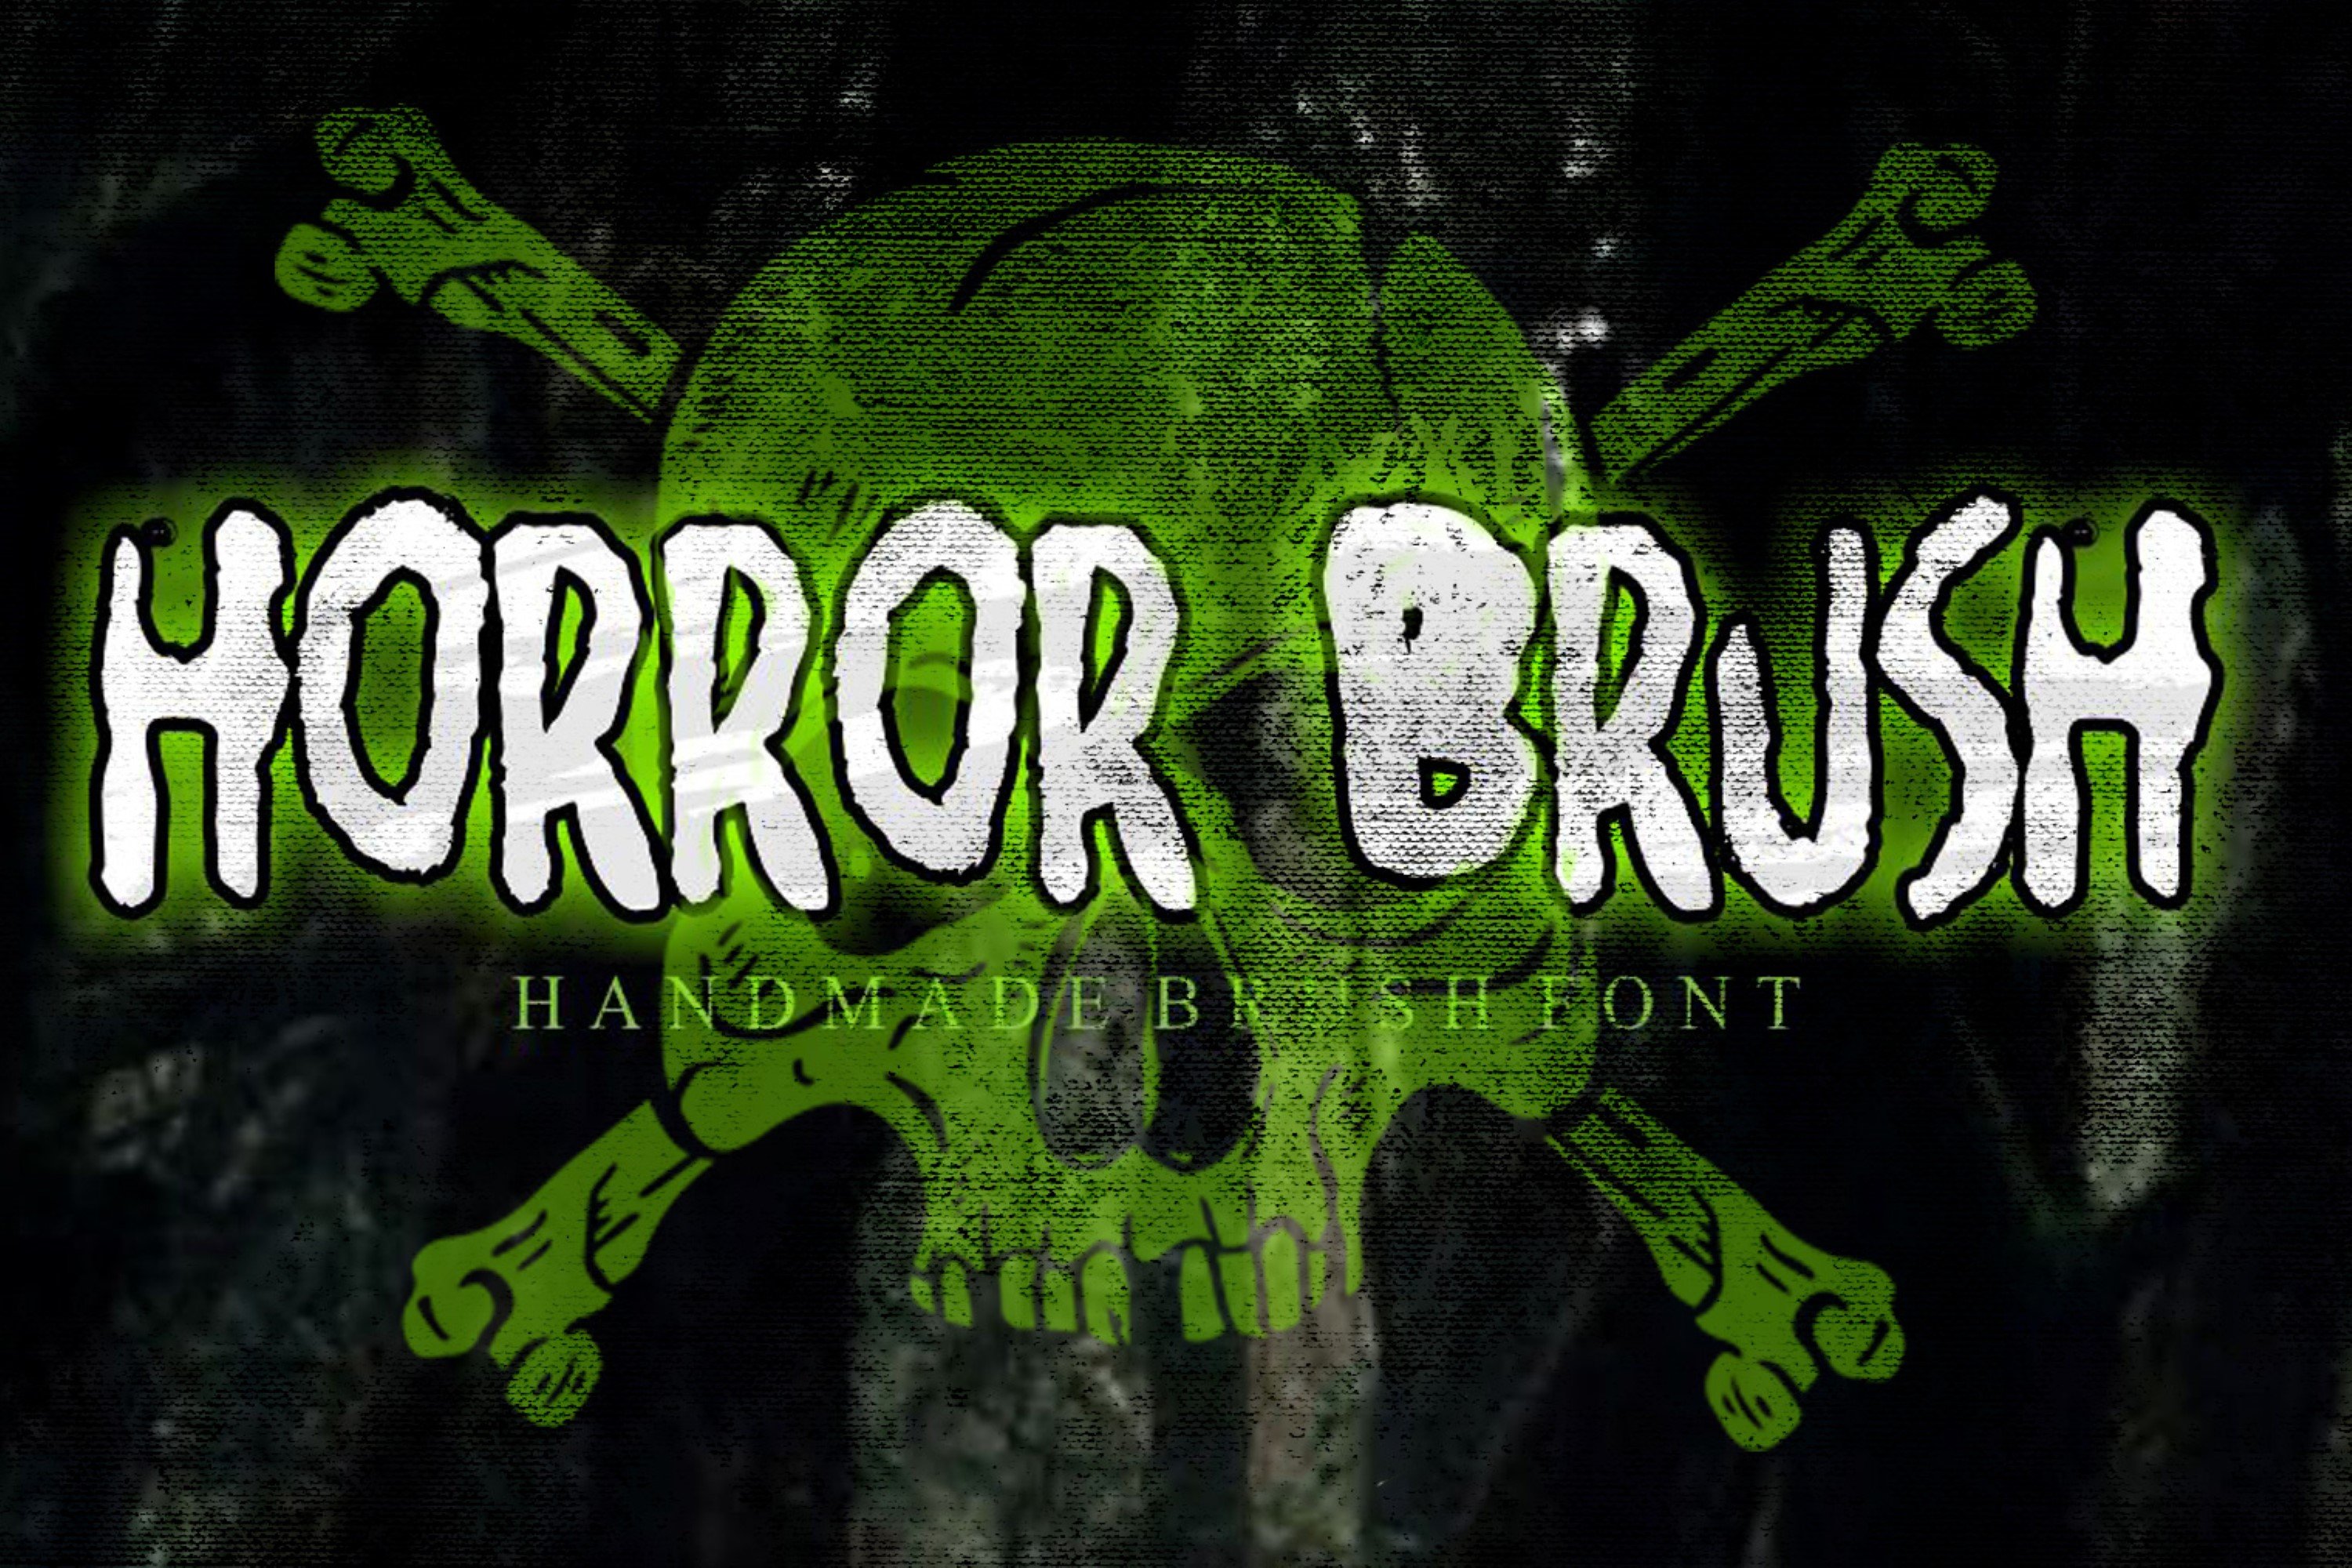 Horror Brush -  Rough and Creepy typ cover image.